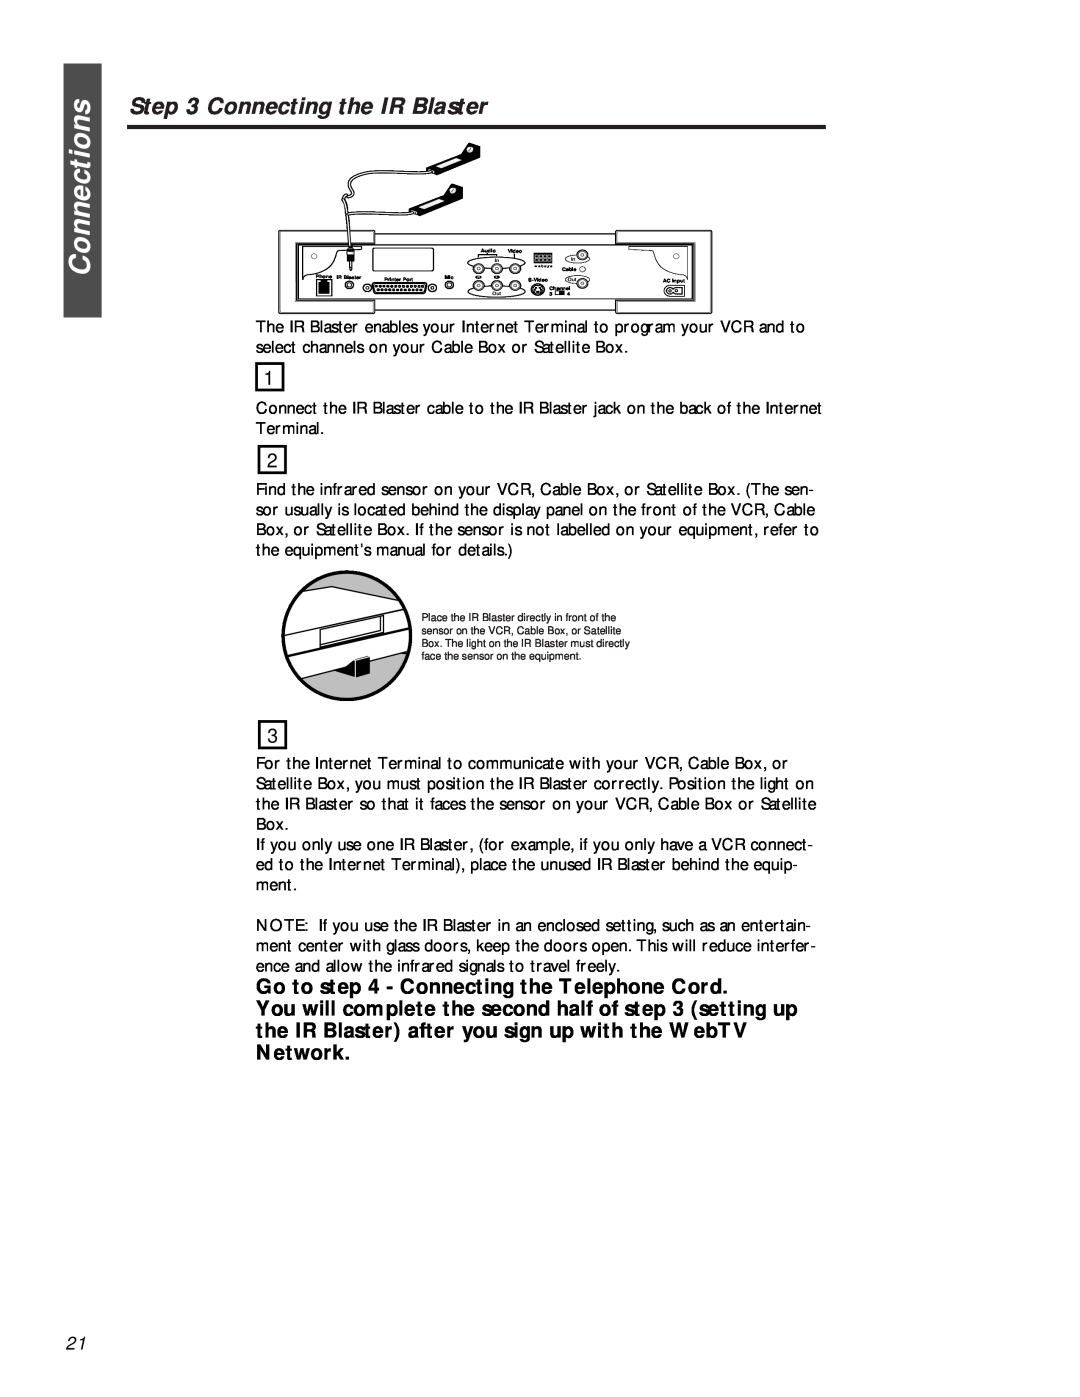 Philips MAT972KB QUG owner manual Connecting the IR Blaster, Connections, Go to - Connecting the Telephone Cord 